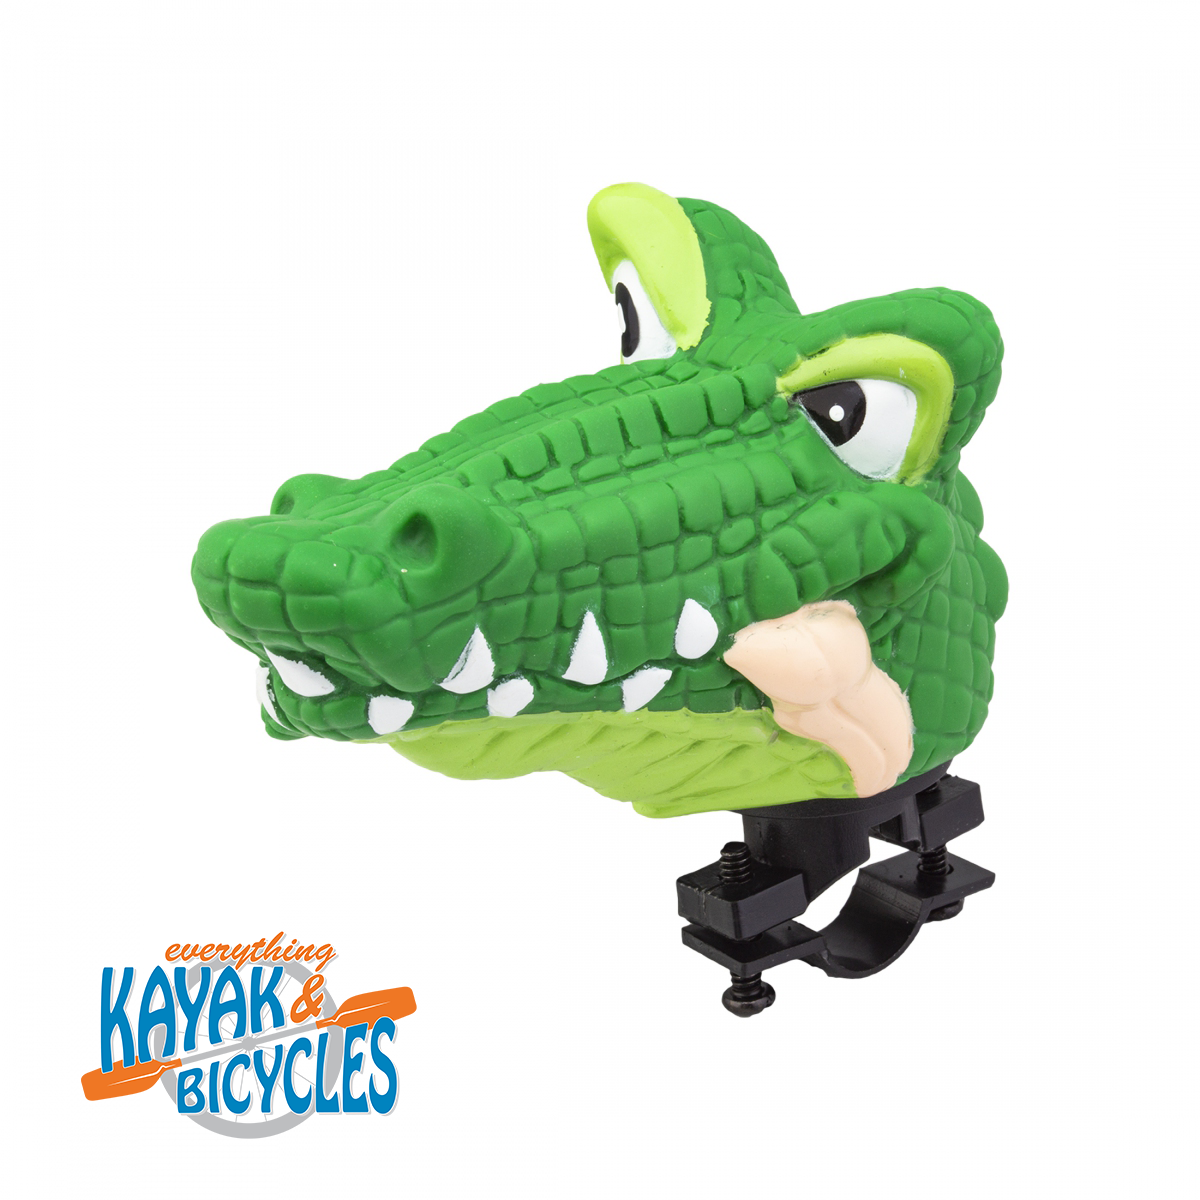 Alligator Bike Horn  
Novelty horns that are great for kids and adults alike
Perfect for novice riders as well as serious riders who like a little flair, personality, or humor for their group rides
Fits most handlebars